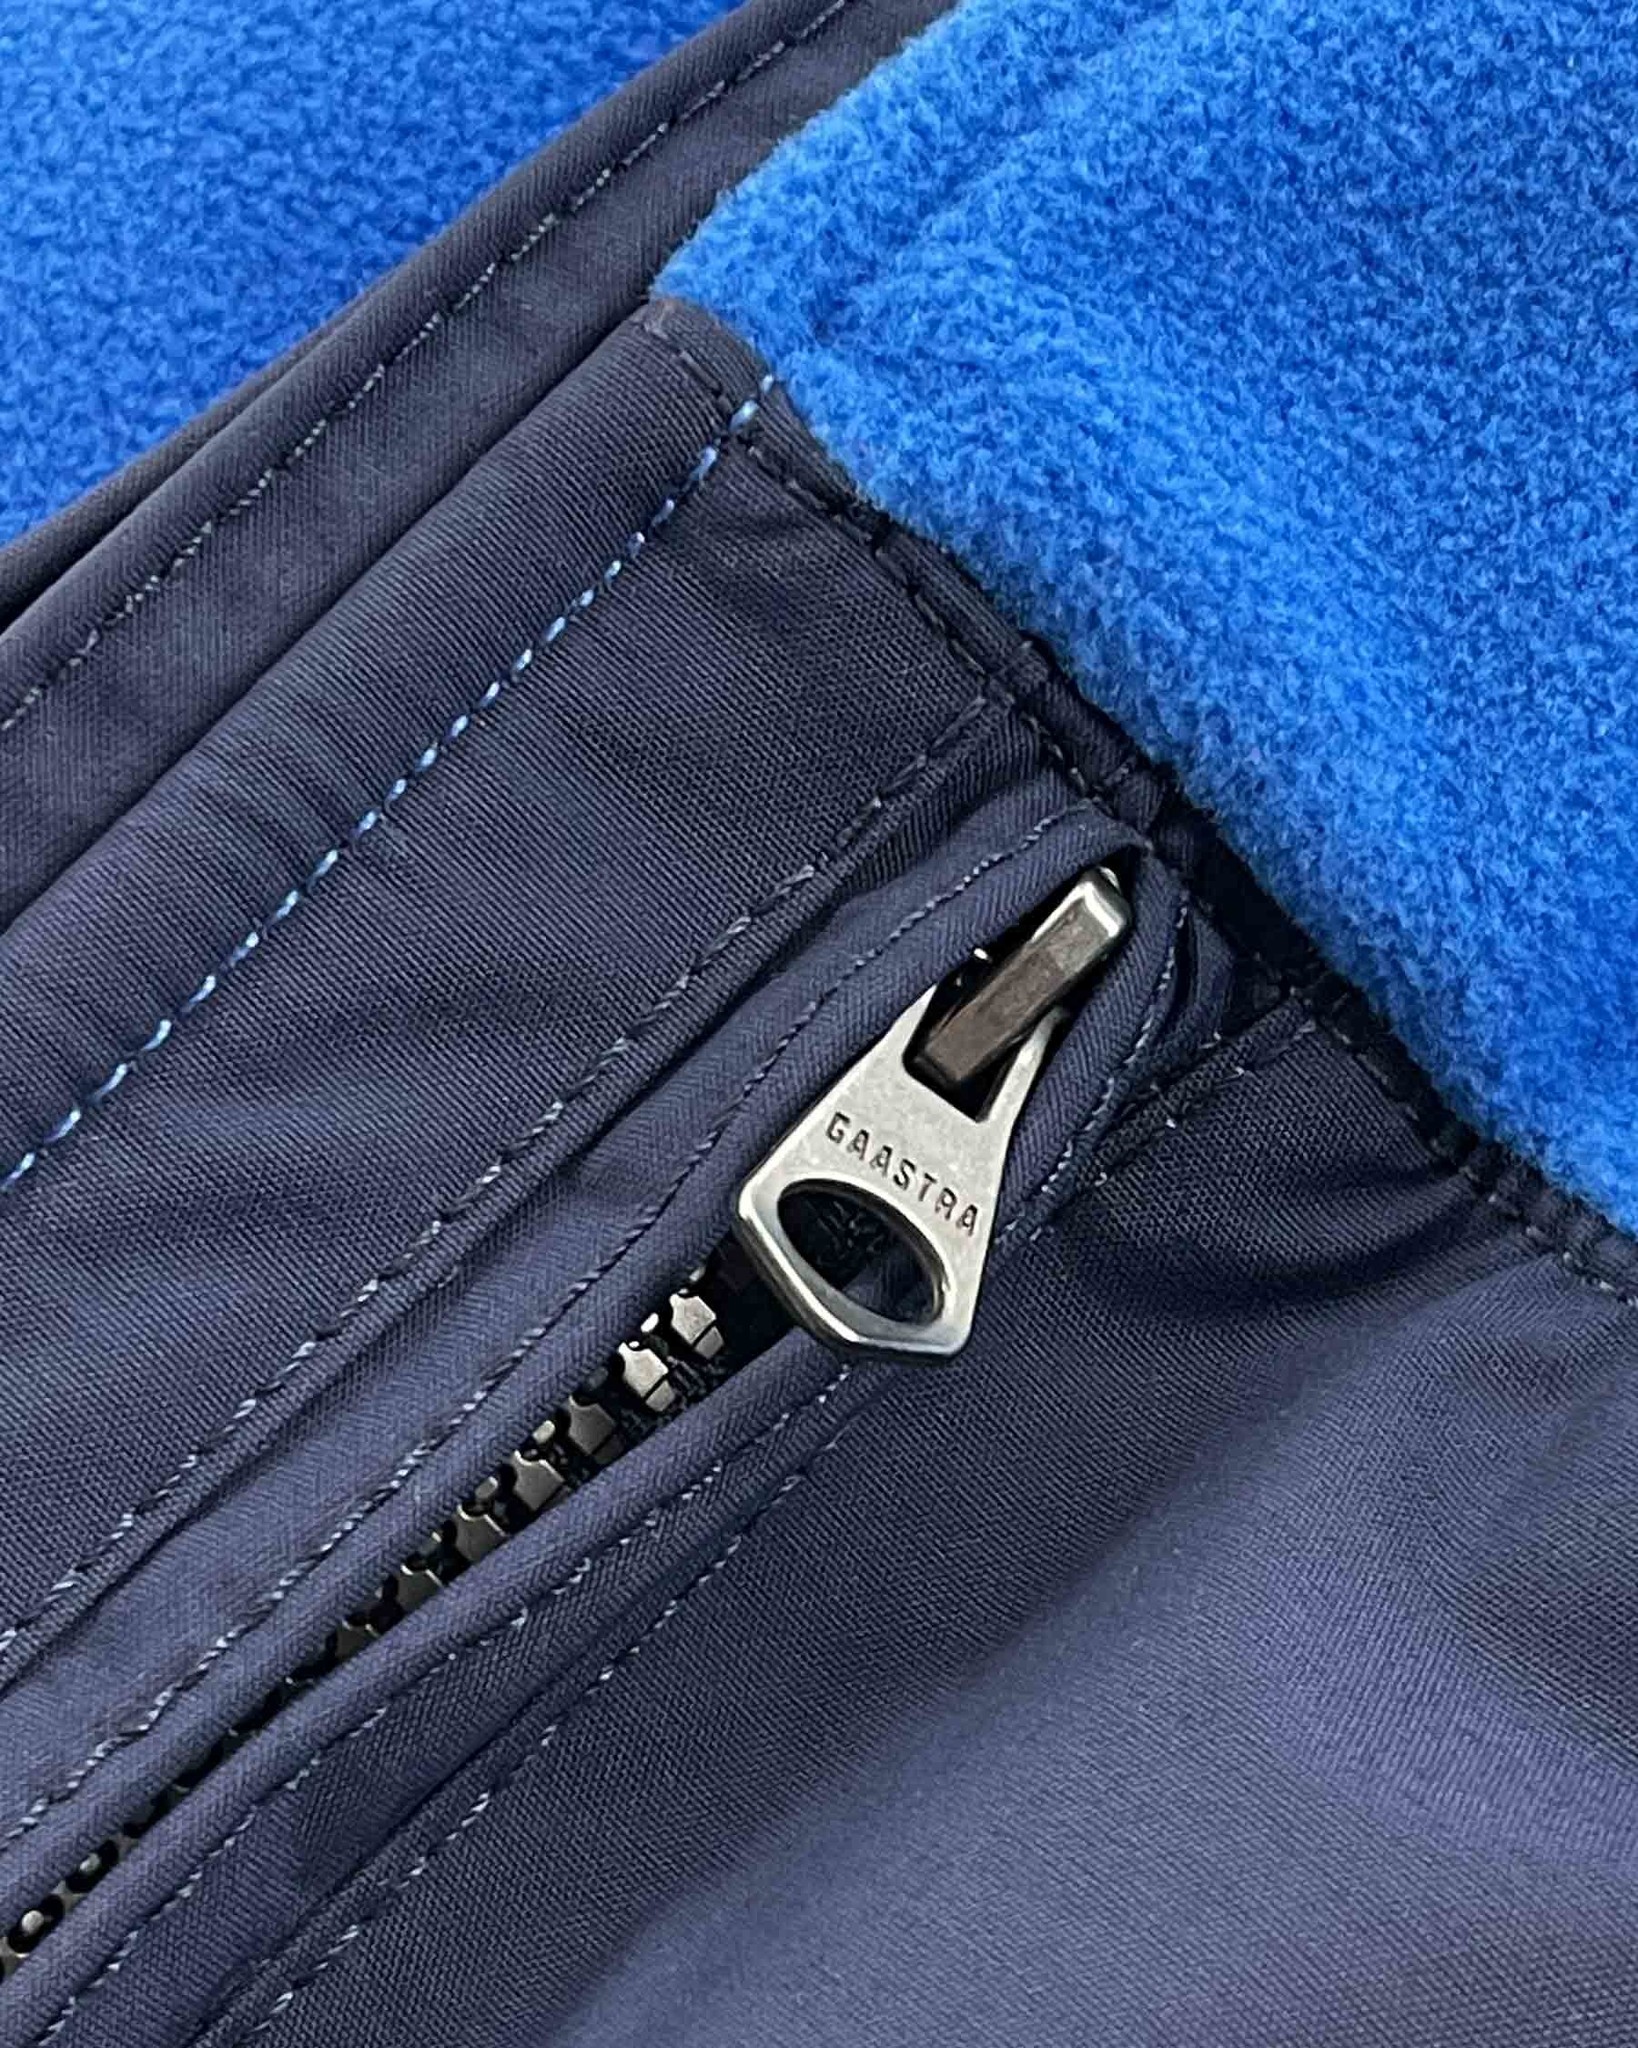 The 100% recycled polyester Viking fleece blue